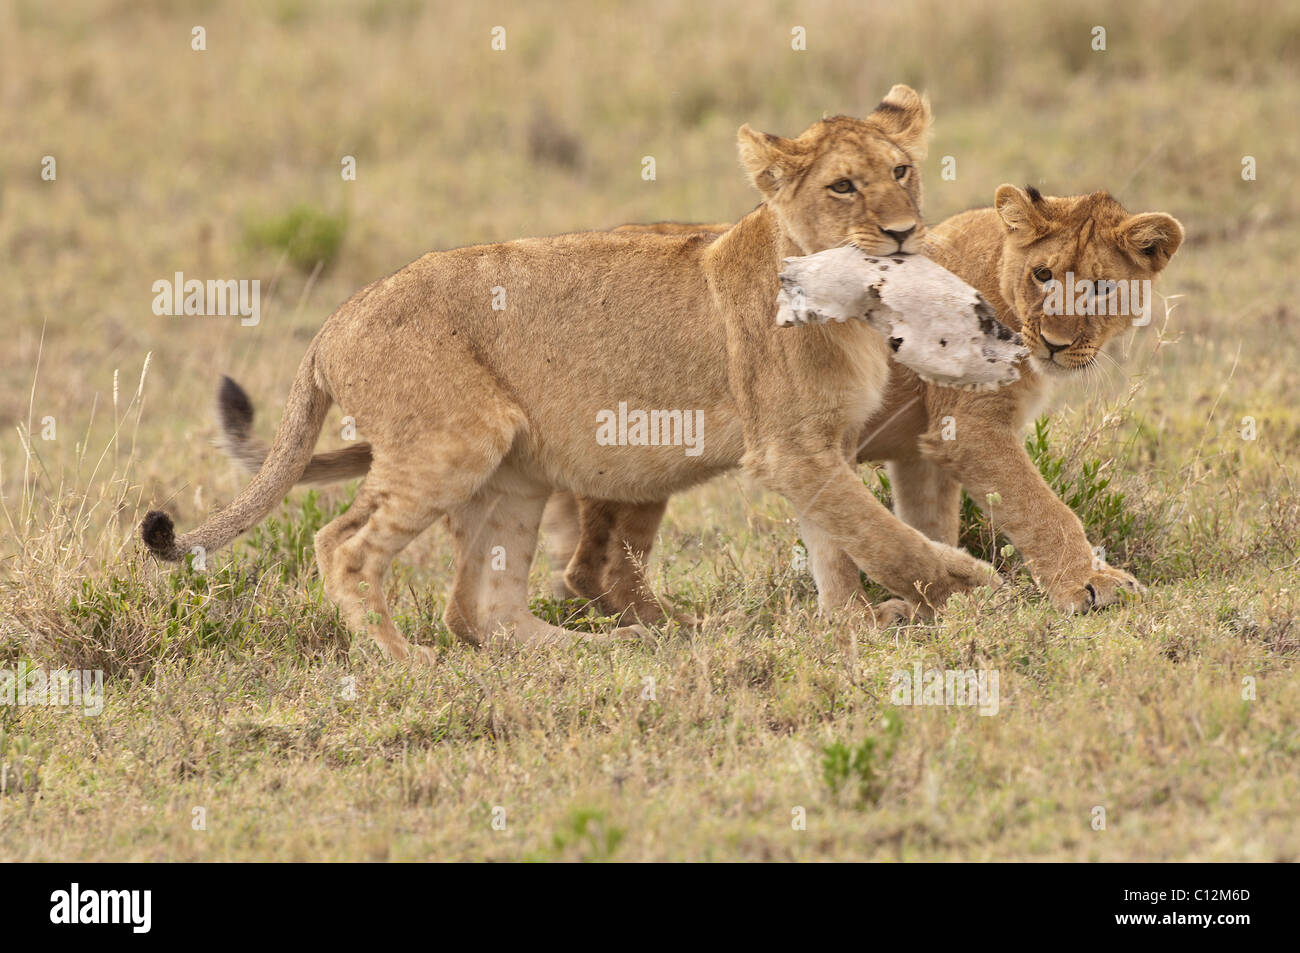 Stock photo of two young lions playing with the skull of a zebra. Stock Photo